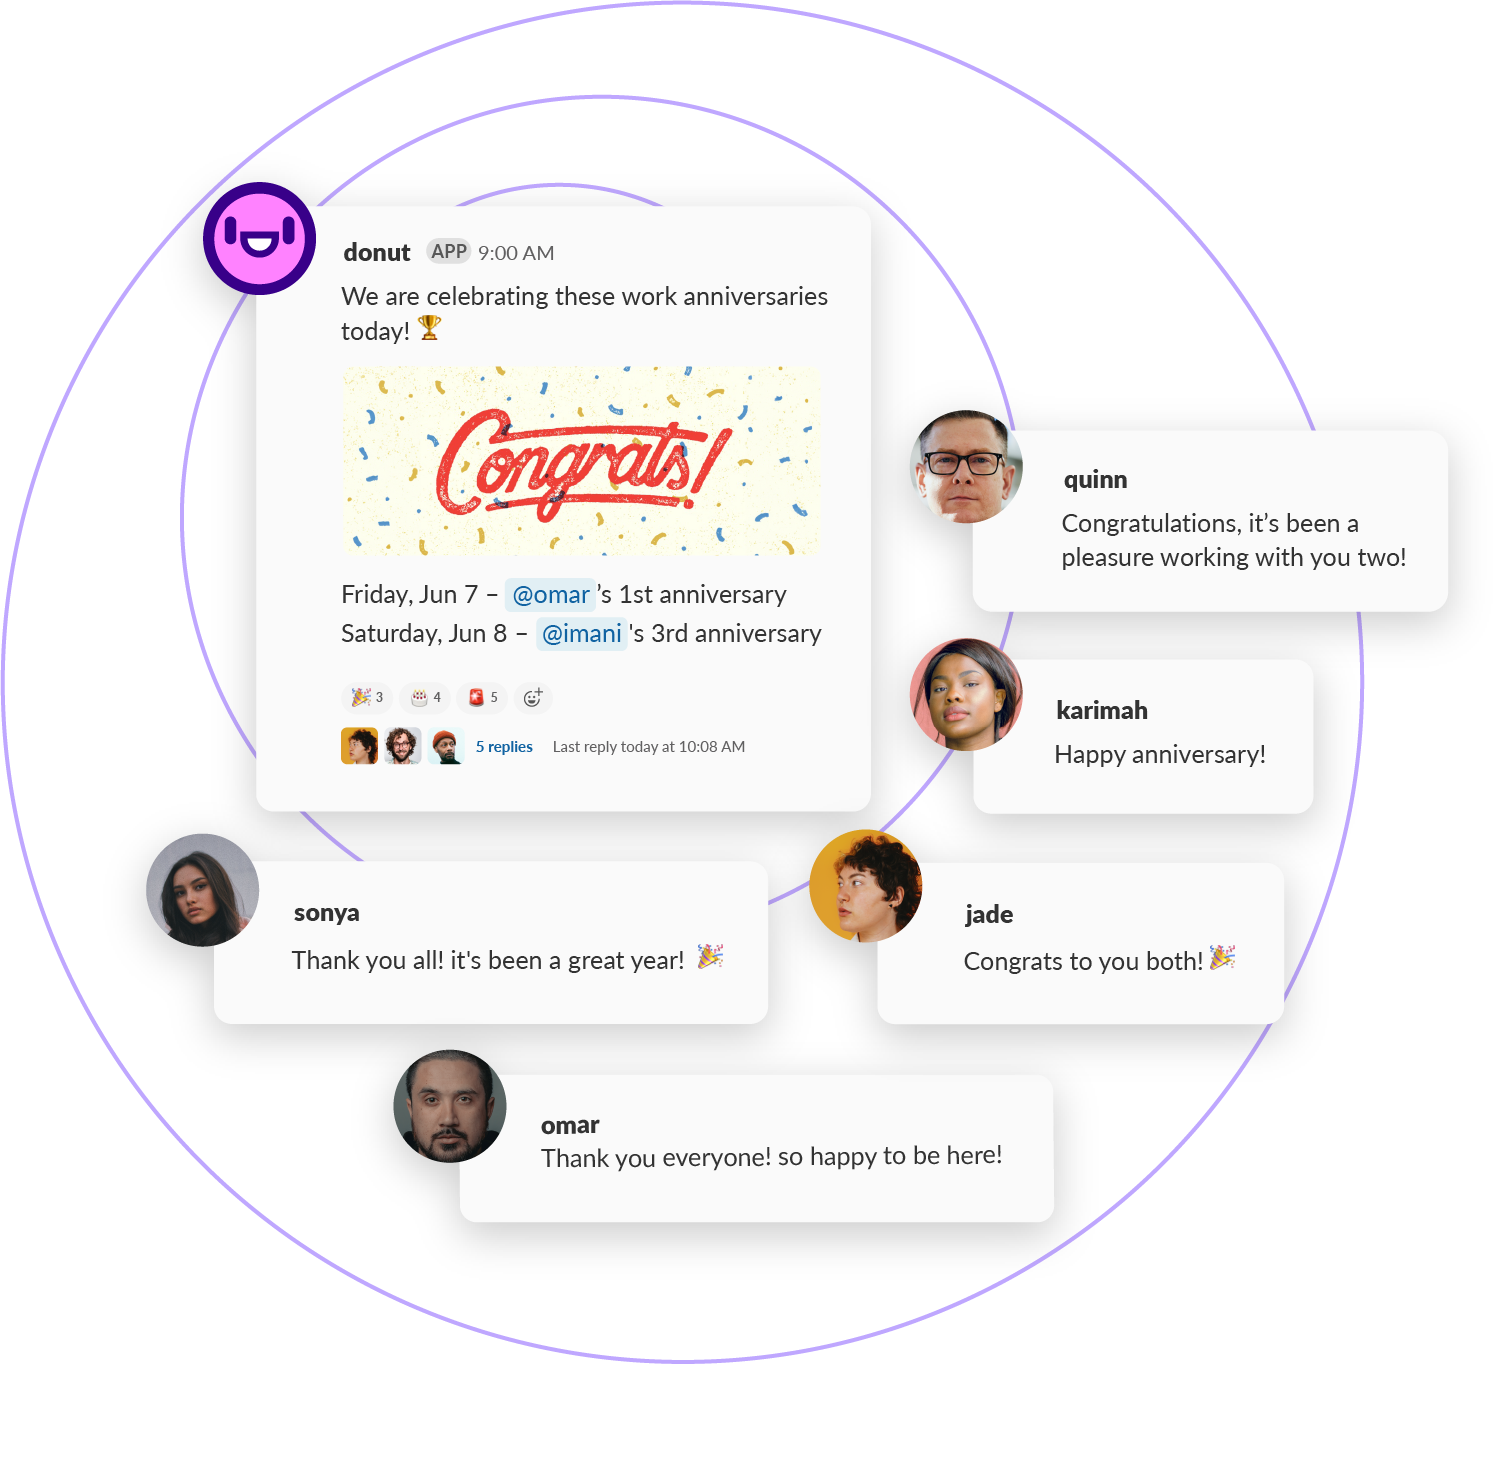 Slack message from Donut celebrating work anniversaries for Omar and Imani. Teammates respond in channel to celebrate them.